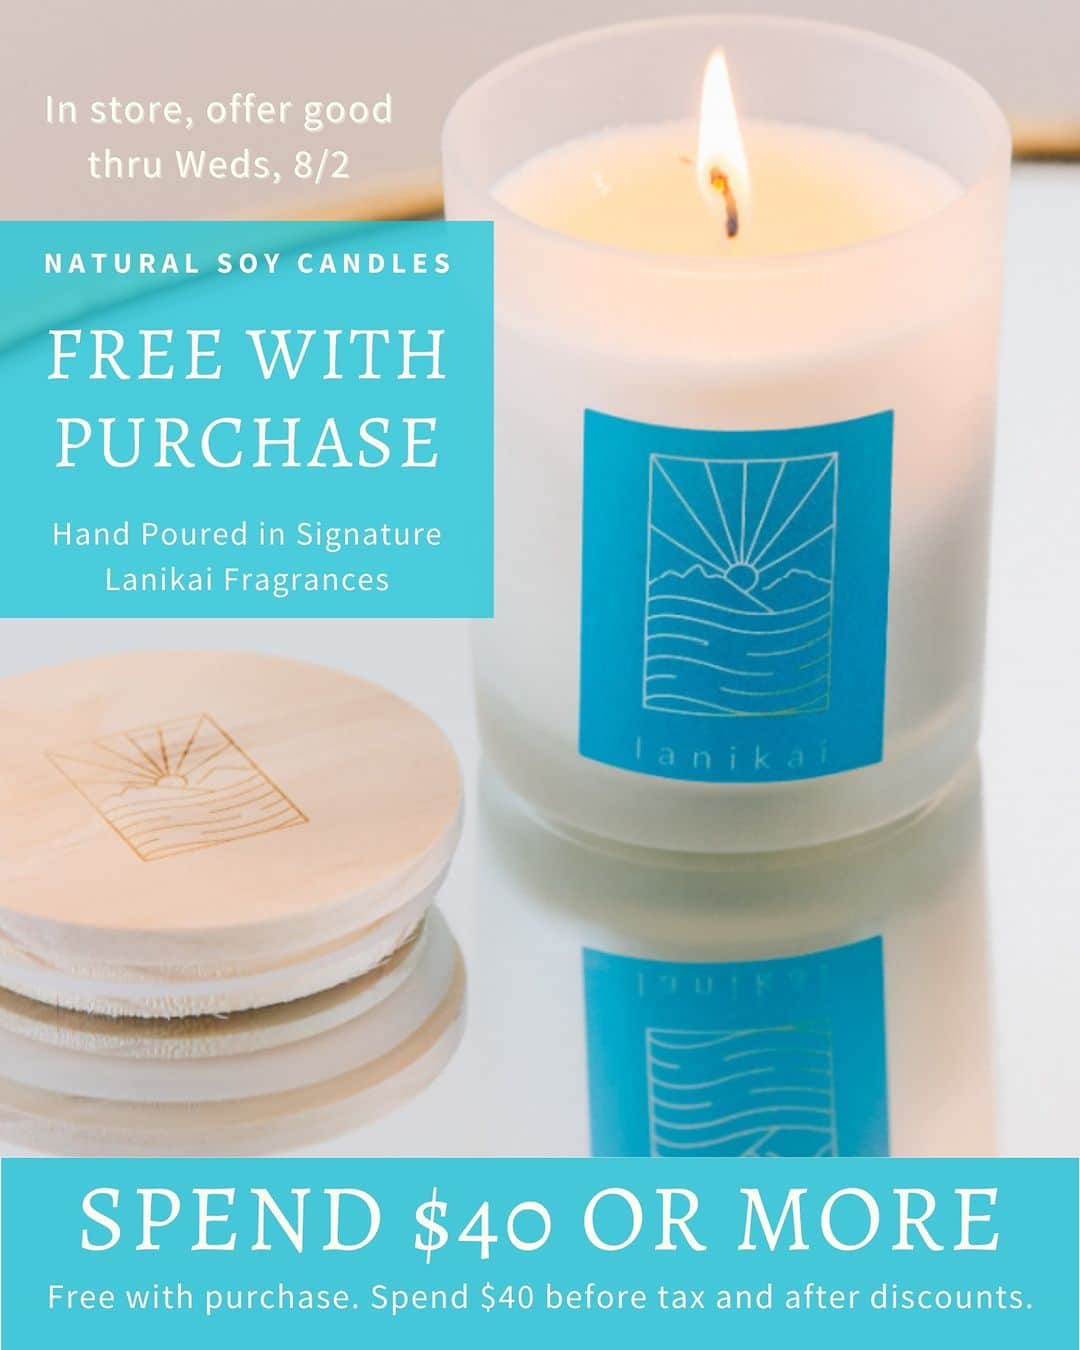 Lanikai Bath and Bodyのインスタグラム：「🌴ALOHA FRIDAY SPECIAL at our Kailua store!🌴  When you spend $40 (before tax & after discounts), get our 6oz Glow Soy Candle 🕯️ for FREE! This beauty comes with the Mokulua Islands beautifully engraved on the candle top and is housed in a stylish frosted glass container. It's also imbued with our signature Lanikai fragrances to elevate your relaxation game. 🌸  This offer runs until Wednesday, August 2nd. Exclusively at our Kailua location! Visit us now and let your weekend glow with Aloha vibes! 🏝️  #AlohaFridaySpecial #LanikaiBathandBody #KailuaExclusive #FreeGift」